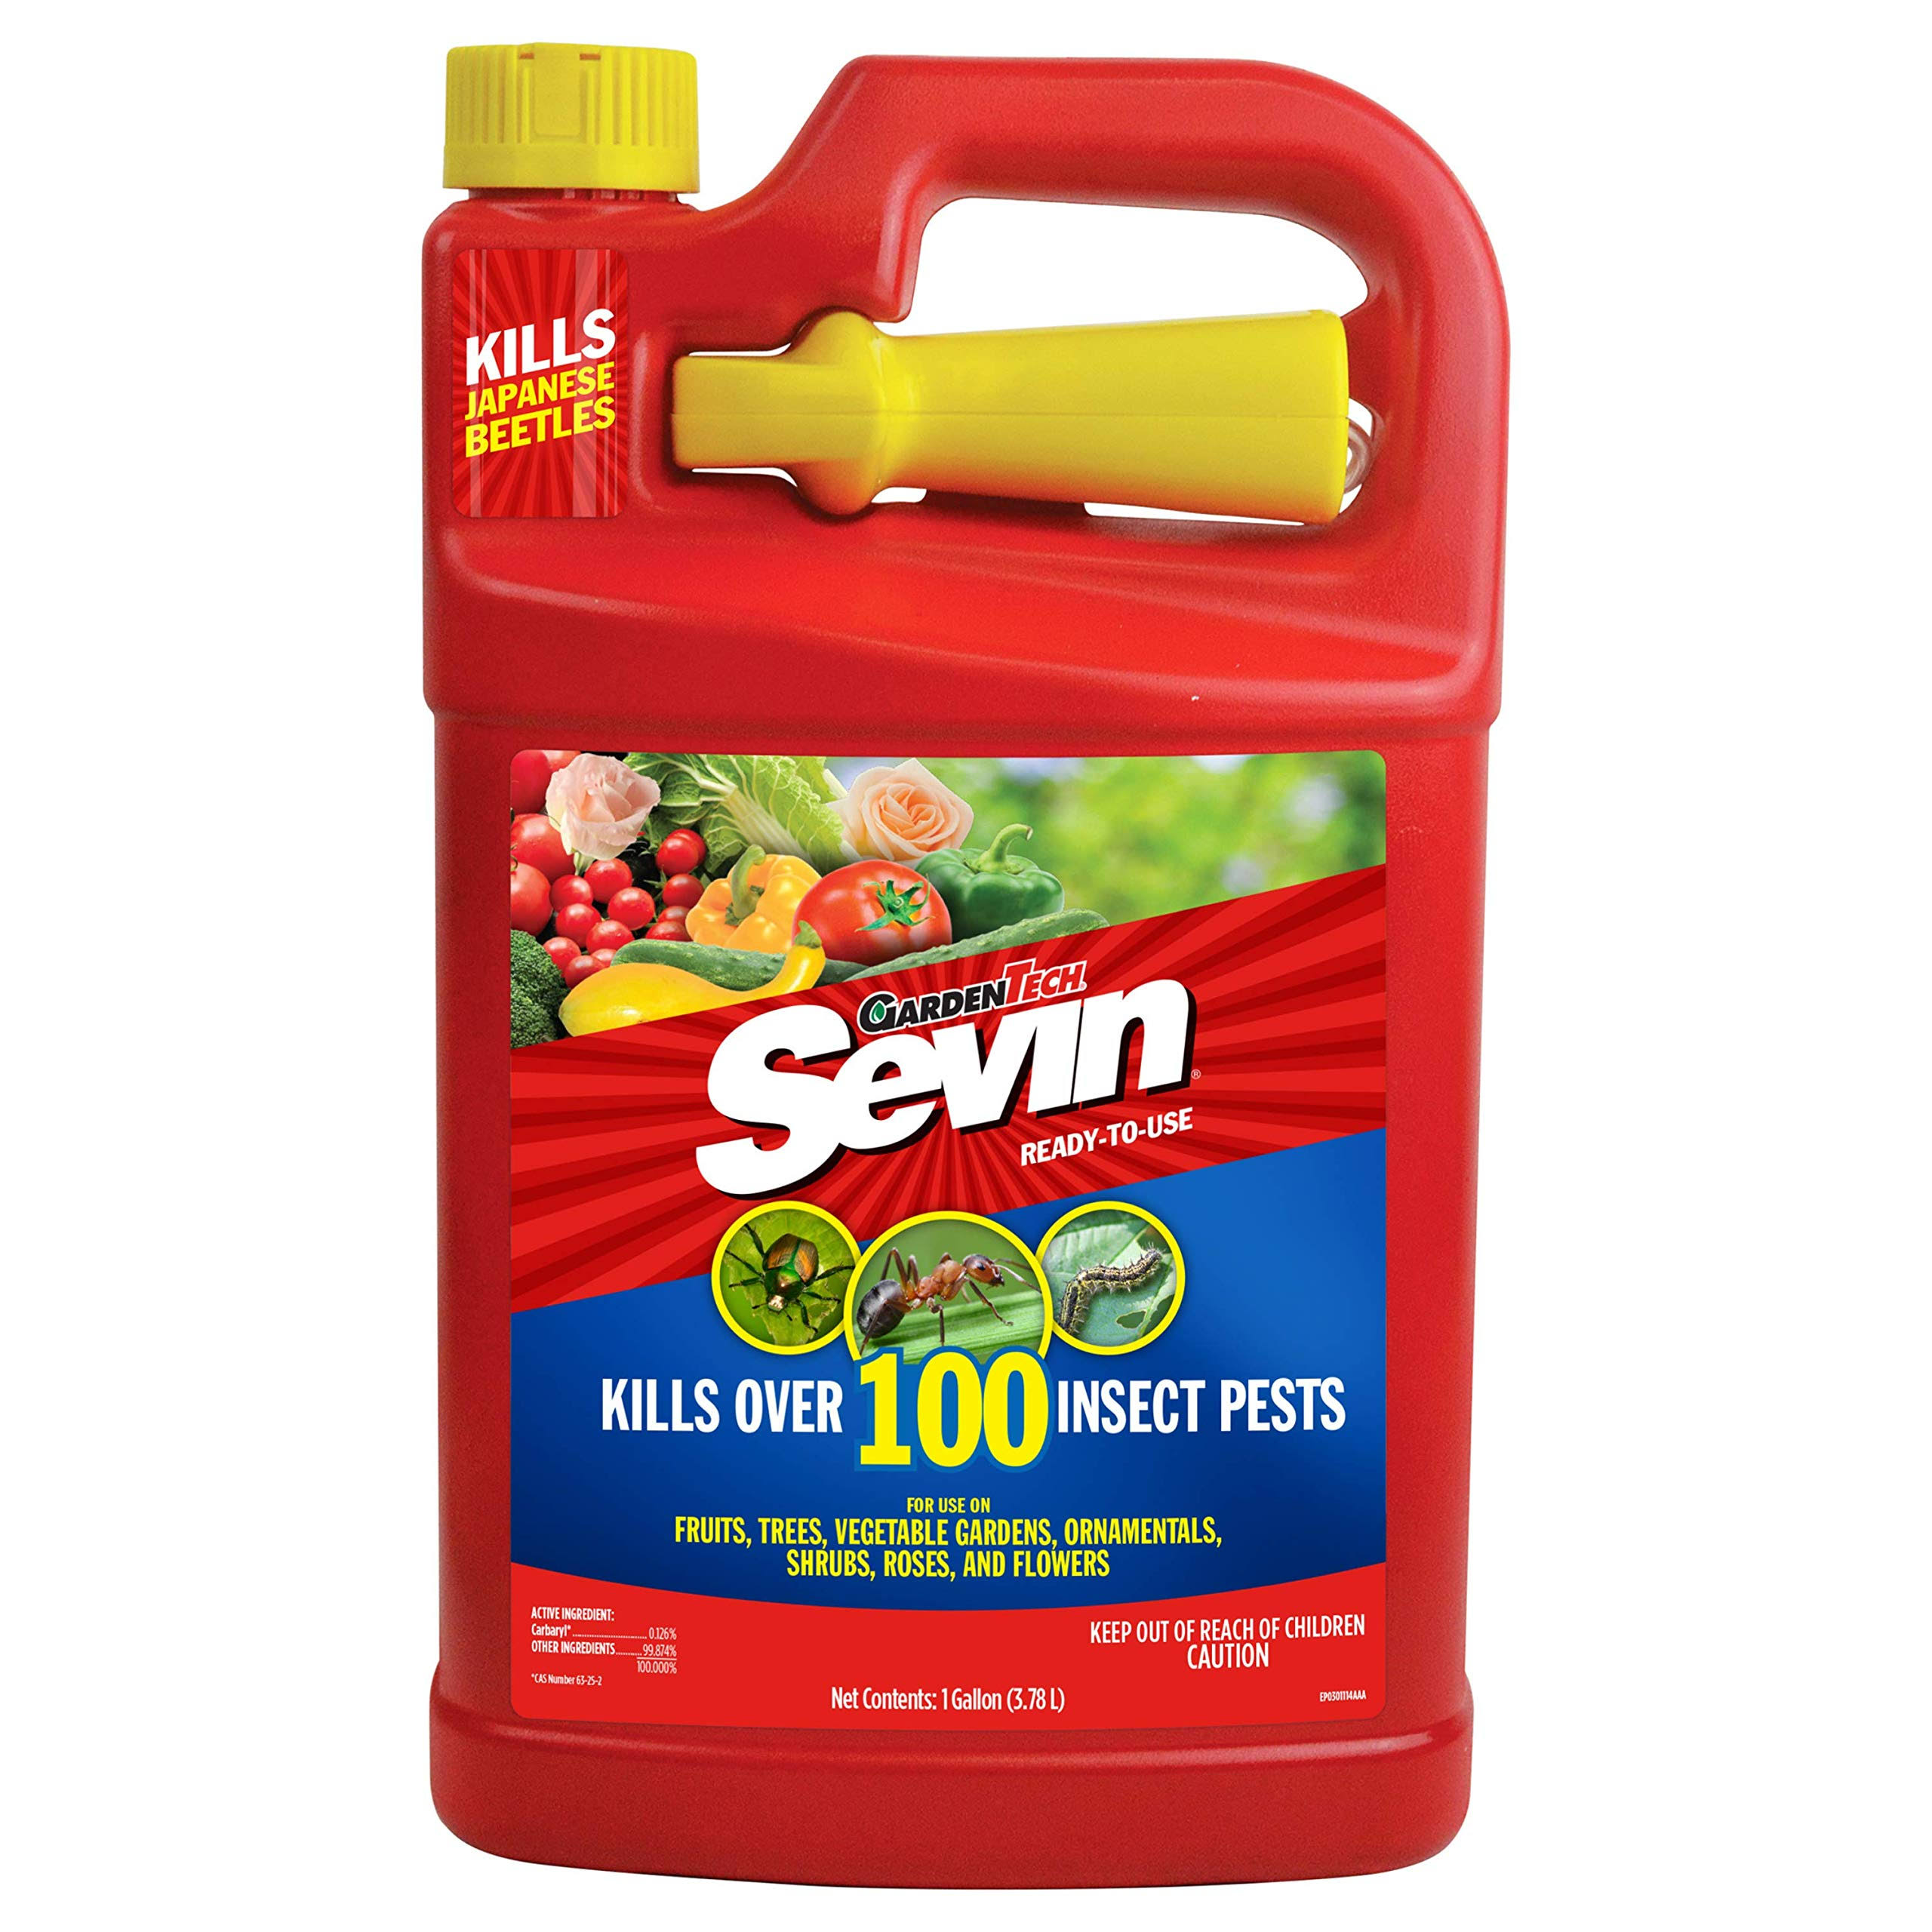 Sevin Ready-to-Use Bug Killer - 1gal